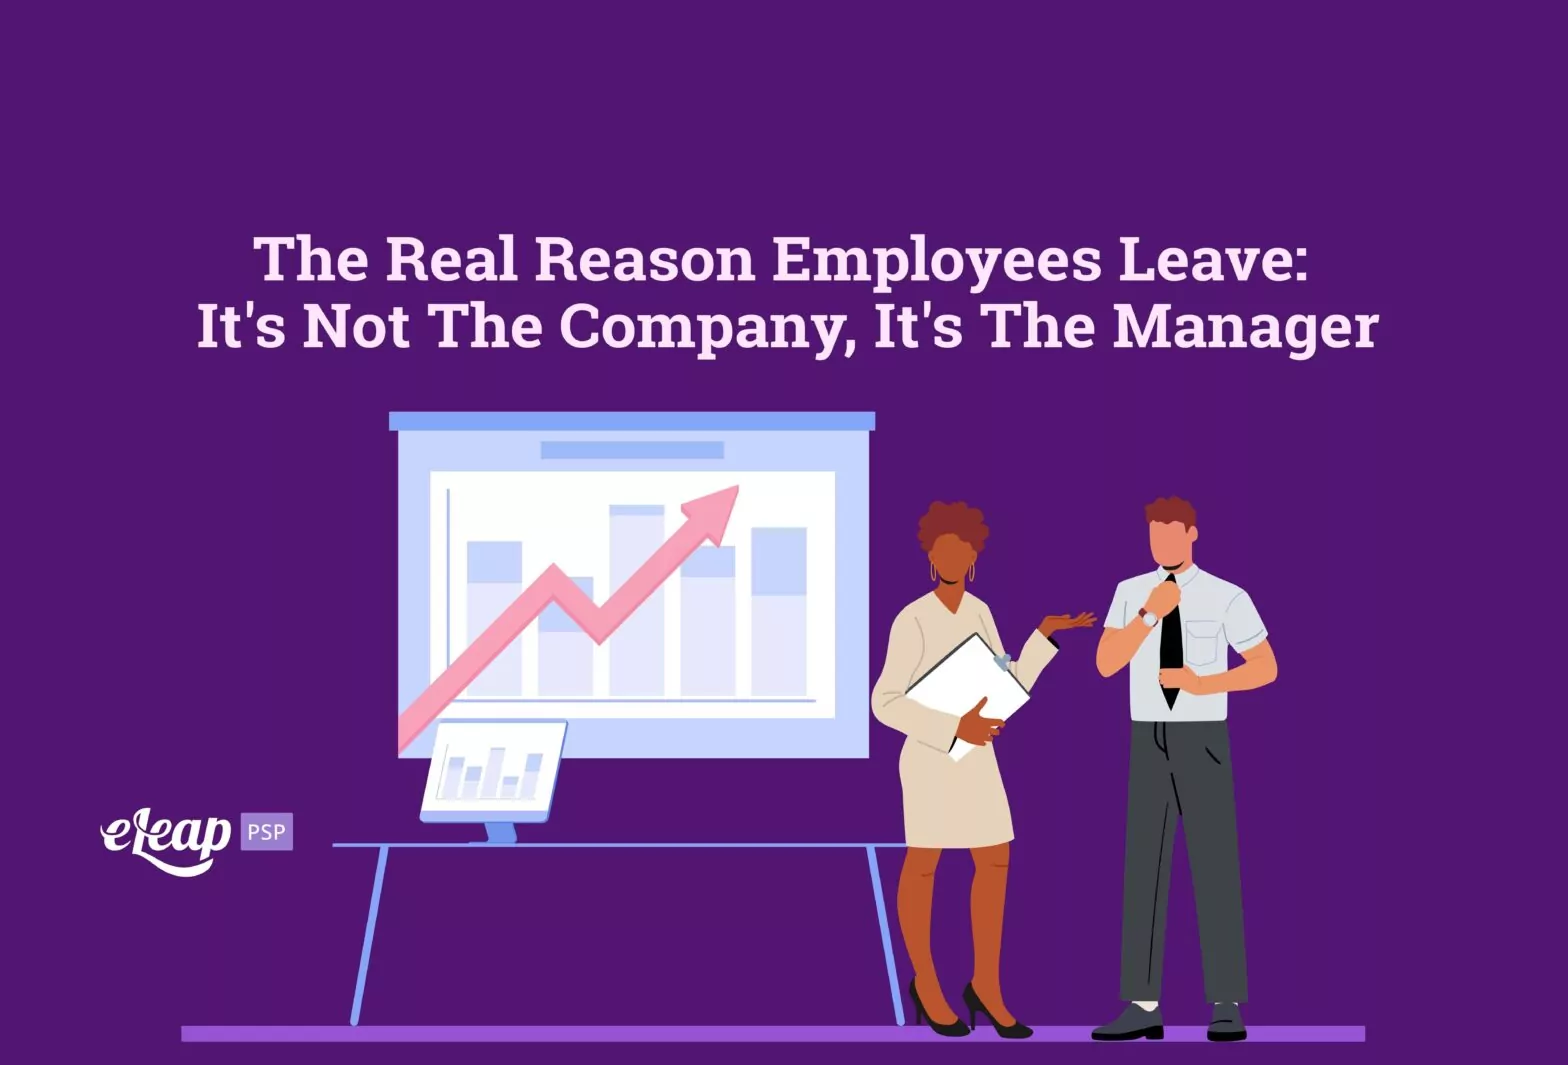 The Real Reason Employees Leave: It’s Not The Company, It’s The Manager